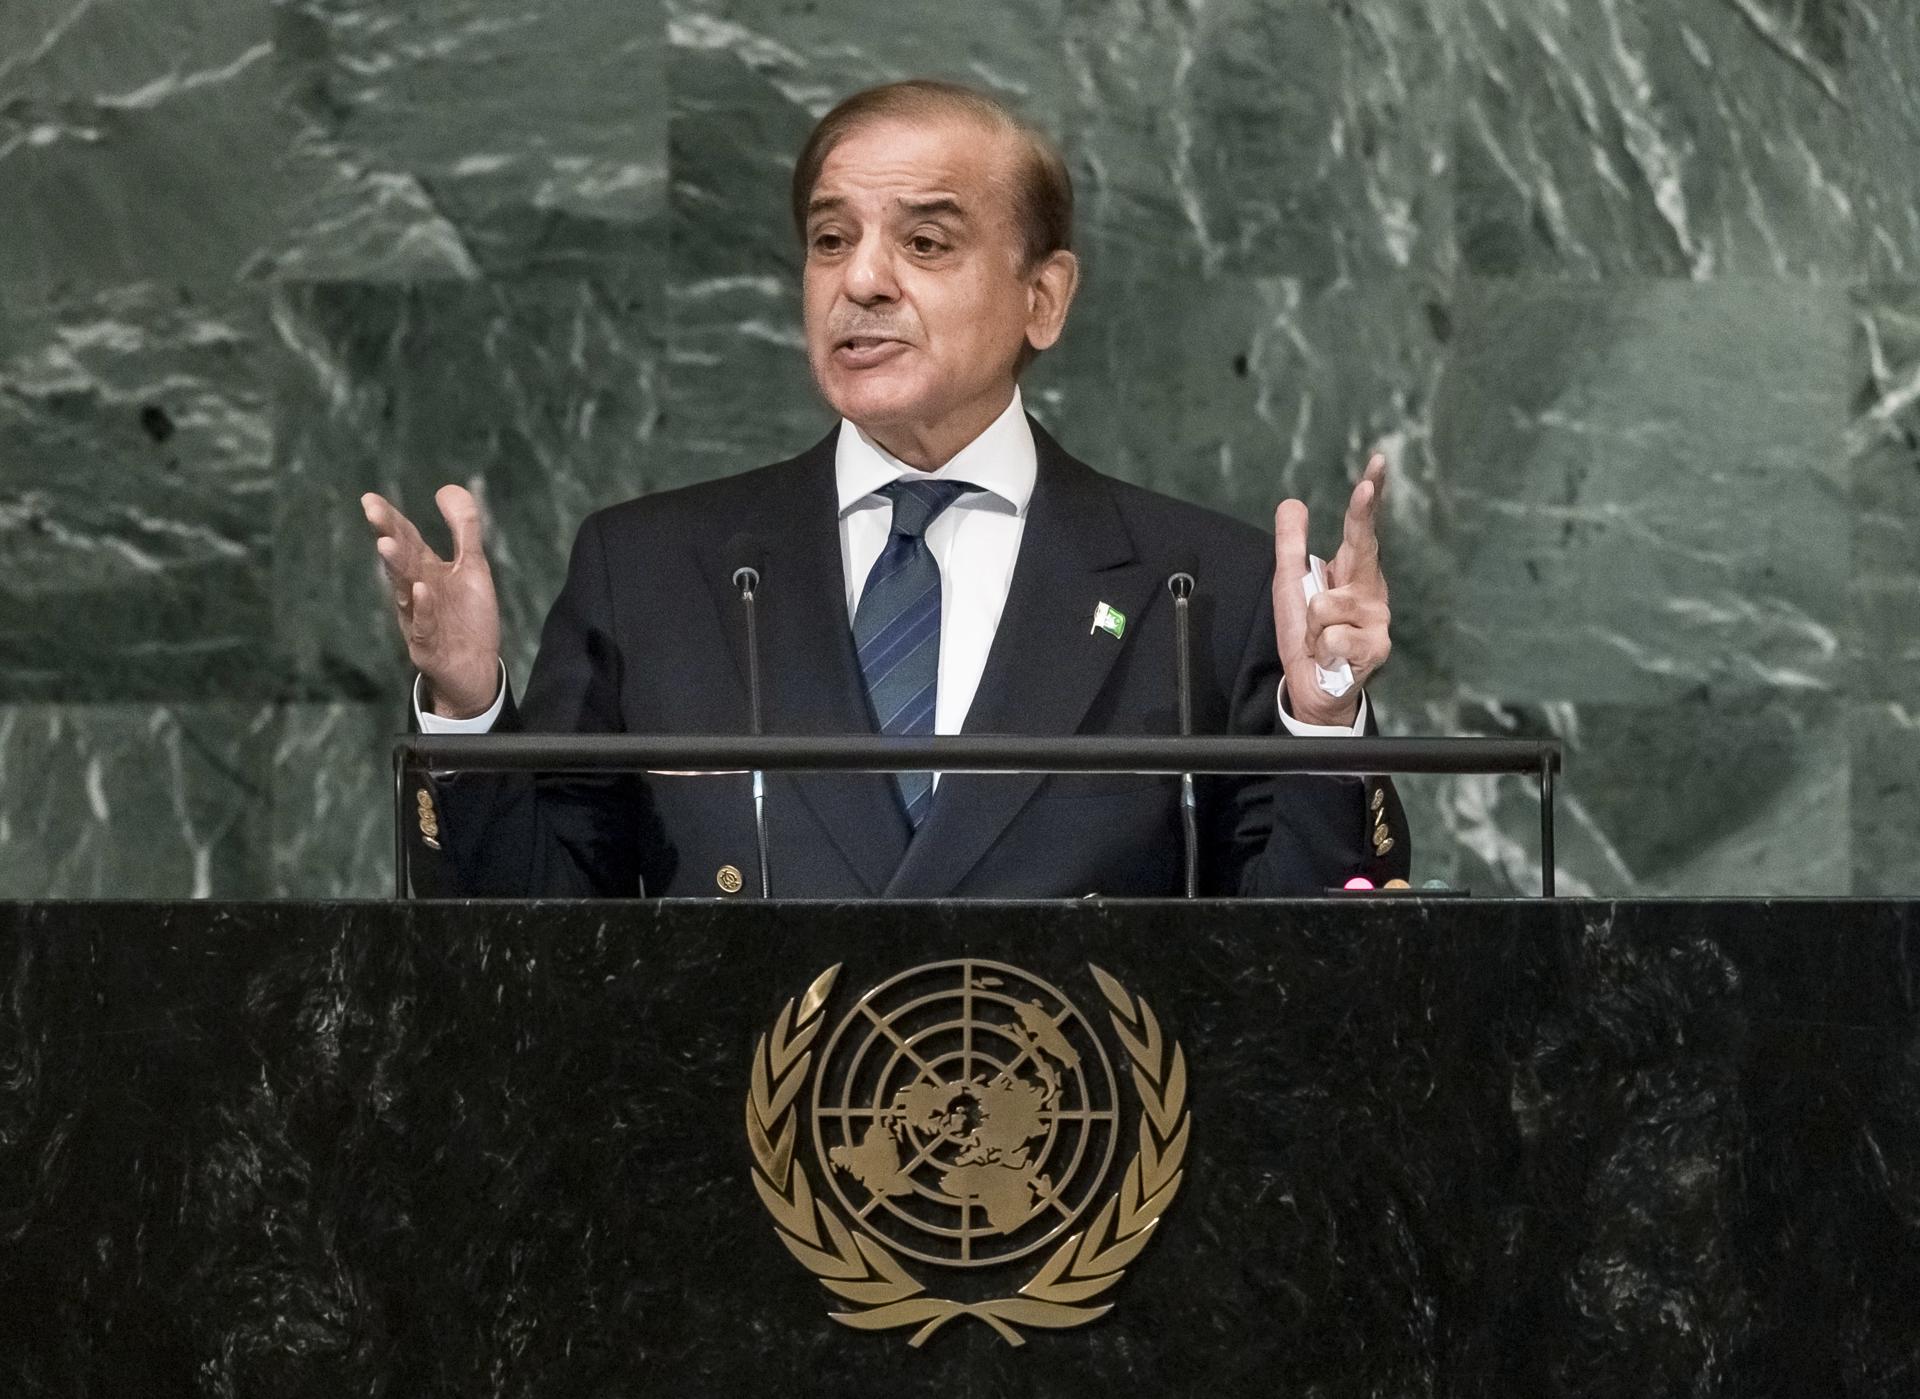 Pakistan's Prime Minister Shehbaz Sharif addresses the General Debate of the 77th session of the United Nations General Assembly in the General Assembly hall at United Nations Headquarters in New York, New York, US, 23 September 2022. EFE-EPA FILE/JUSTIN LANE